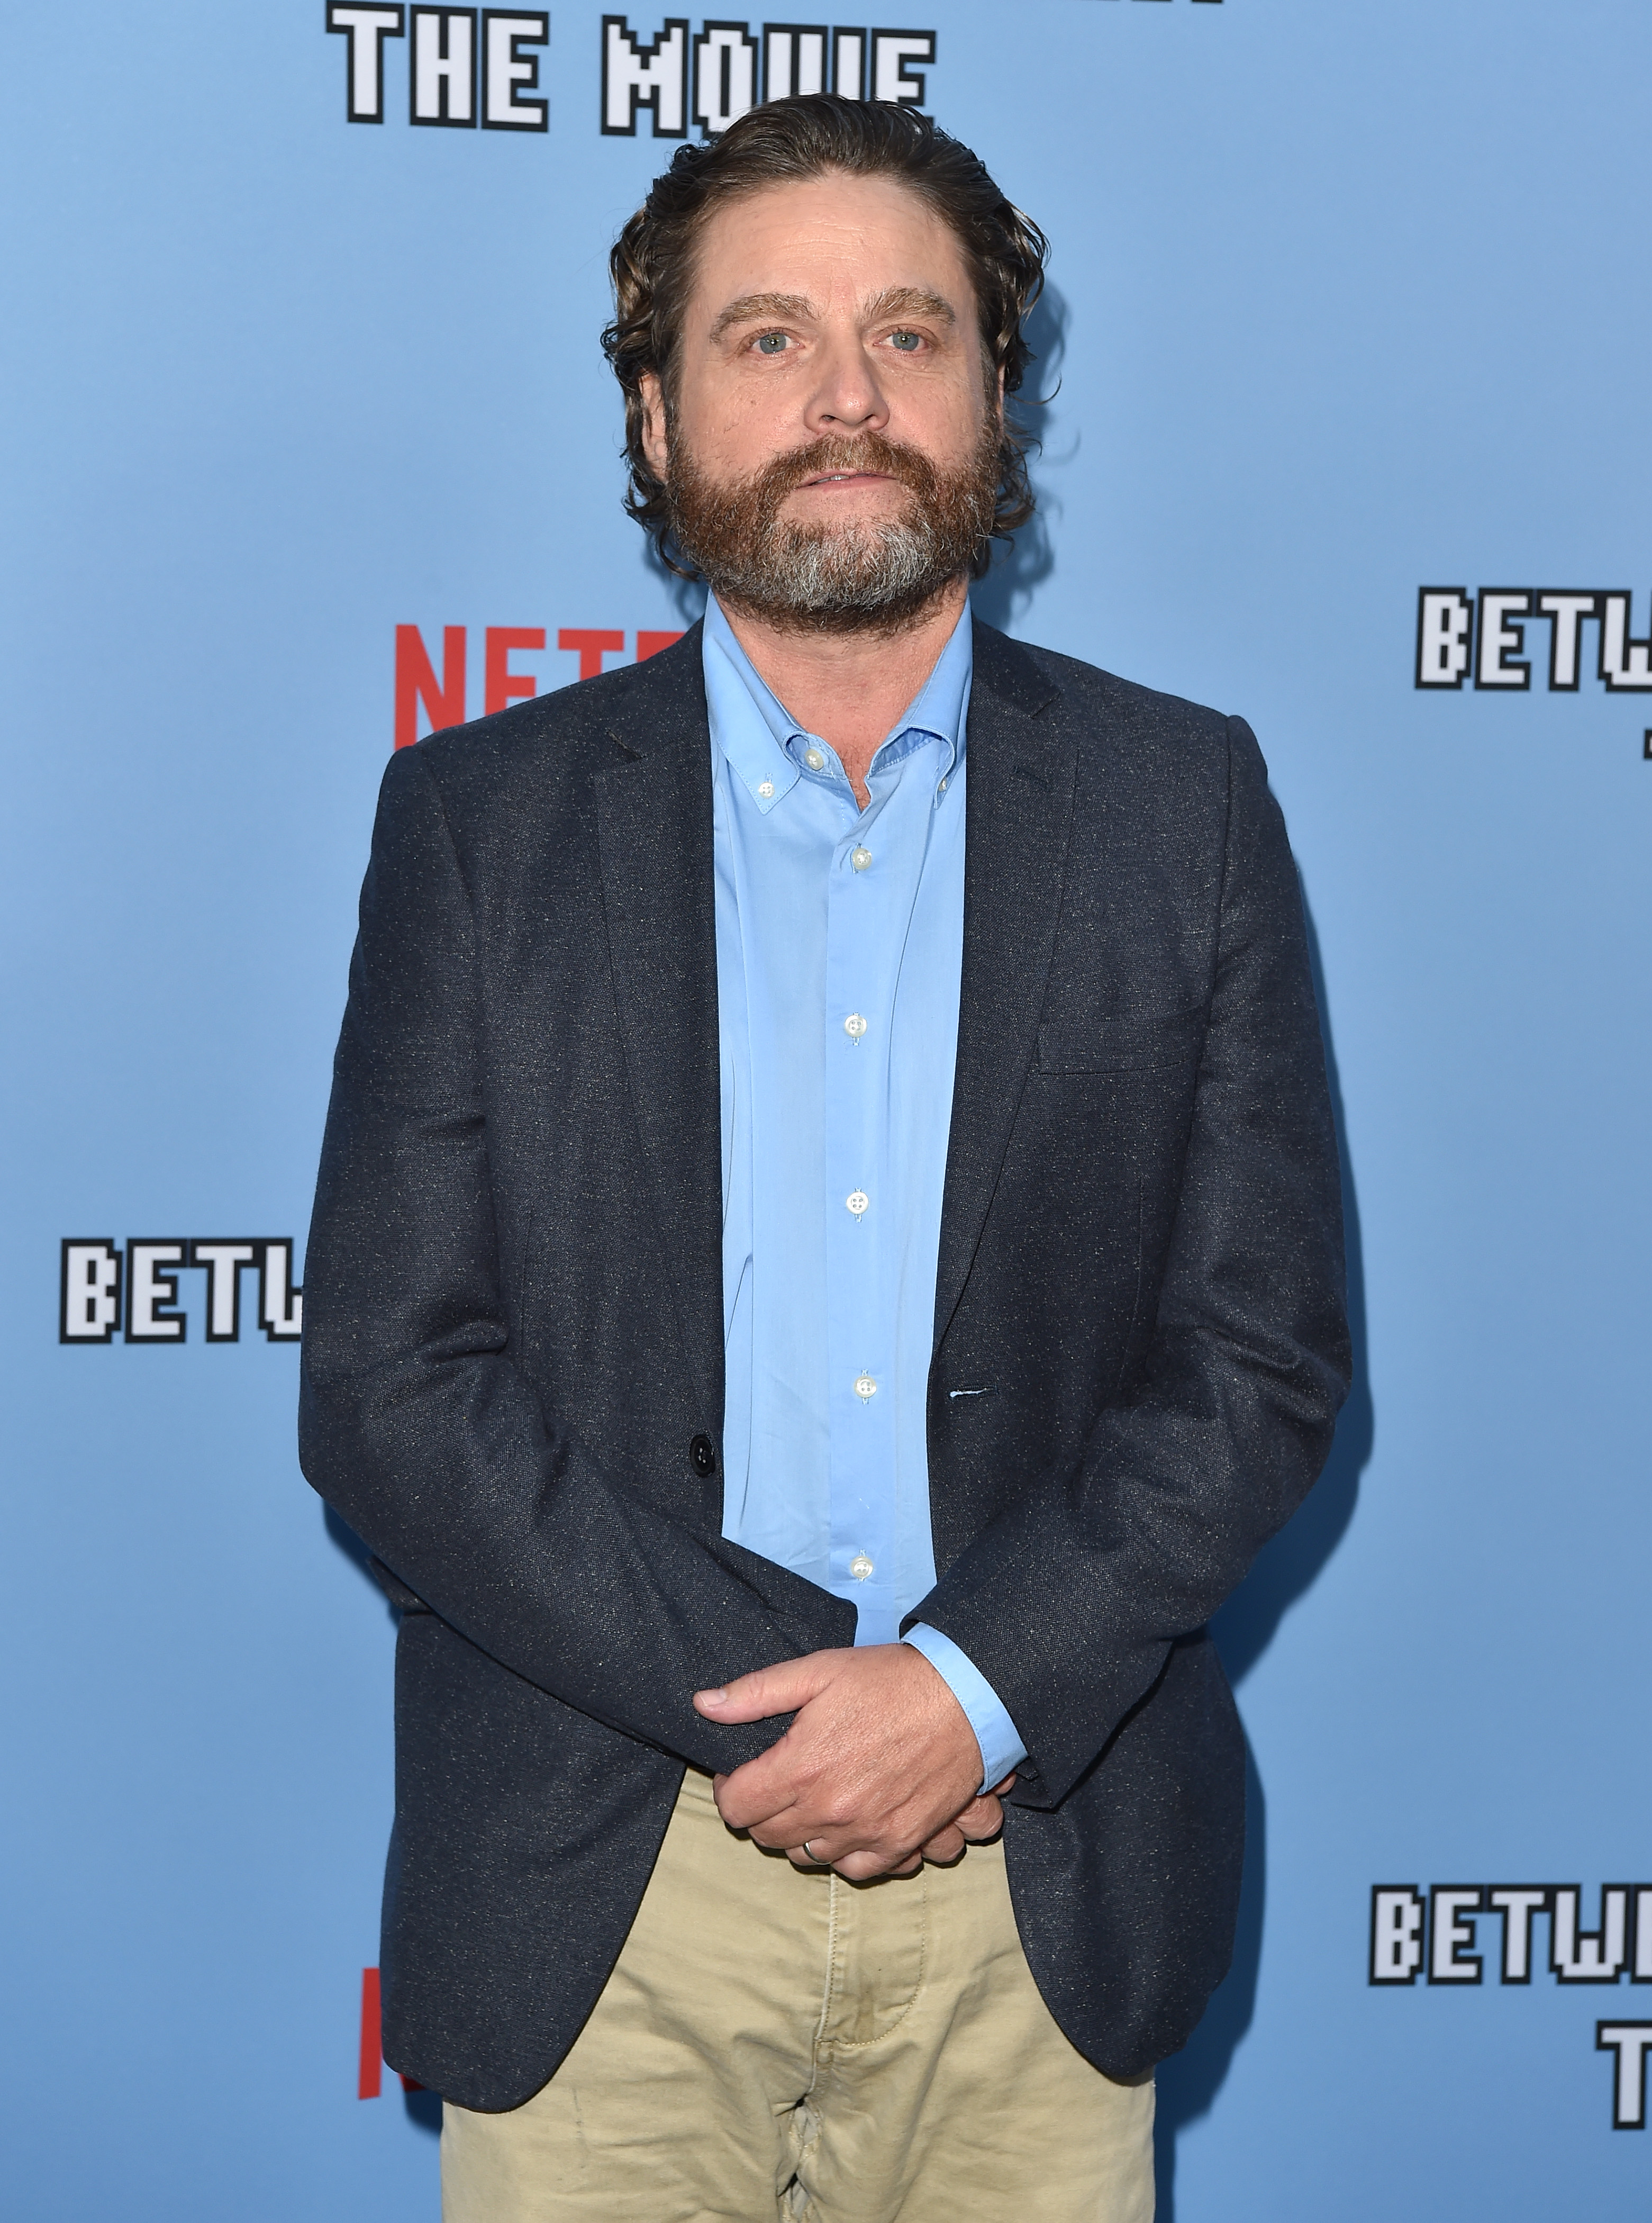 Zach Galifianakis at the LA Premiere of Netflix's "Between Two Ferns: The Movie" in Hollywood, California, on September 16, 2019. | Source: Getty Images